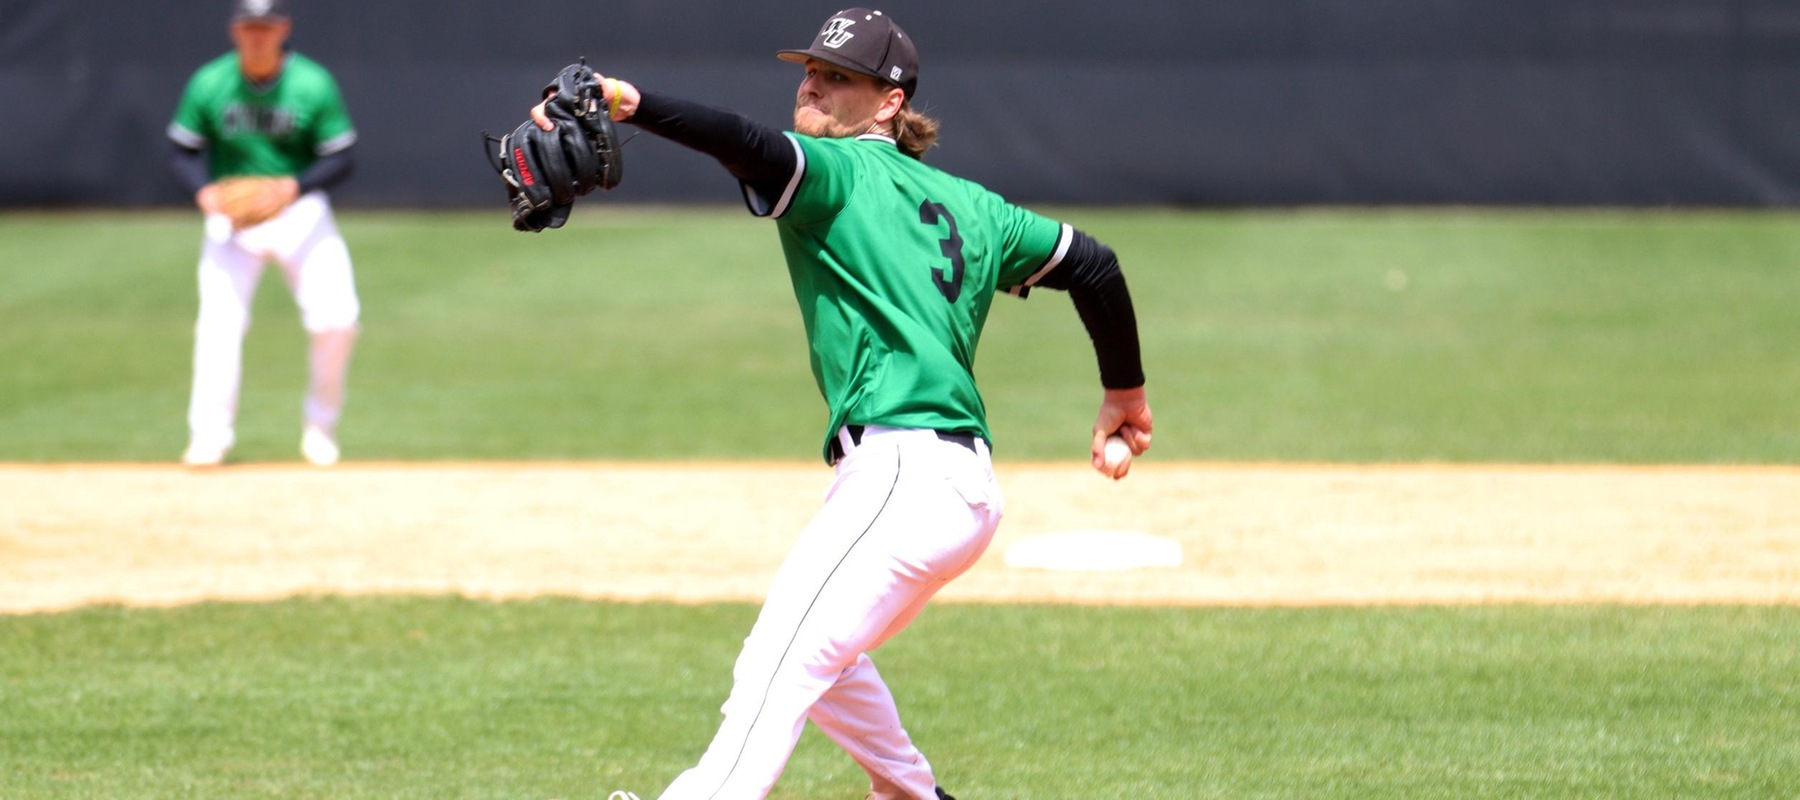 Photo of Ryan Sandberg who struck out 13 in 8,2 innings in game one against USciences. Copyright 2022; Wilmington University. All rights reserved. Photo by Dan Lauletta. April 10, 2022 vs. USciences